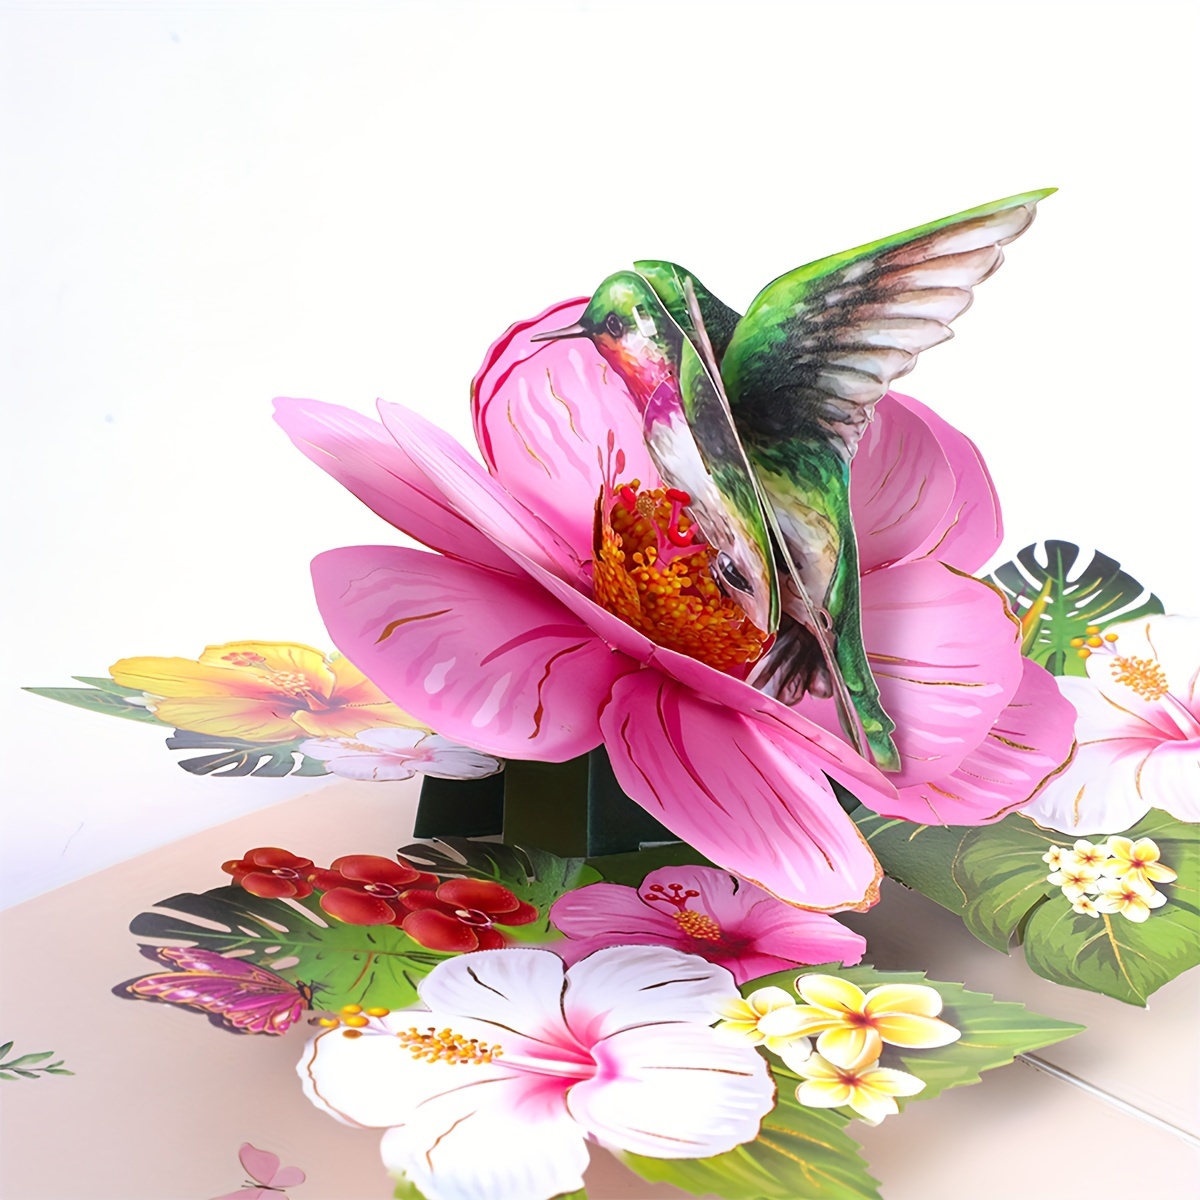 

2024 Handcrafted 3d Floral Greeting Card - Vibrant Fantasy Design With Laser-cut Shine, Ideal For Mother's Day, Valentine's, And Commemorative Cards With Message Space